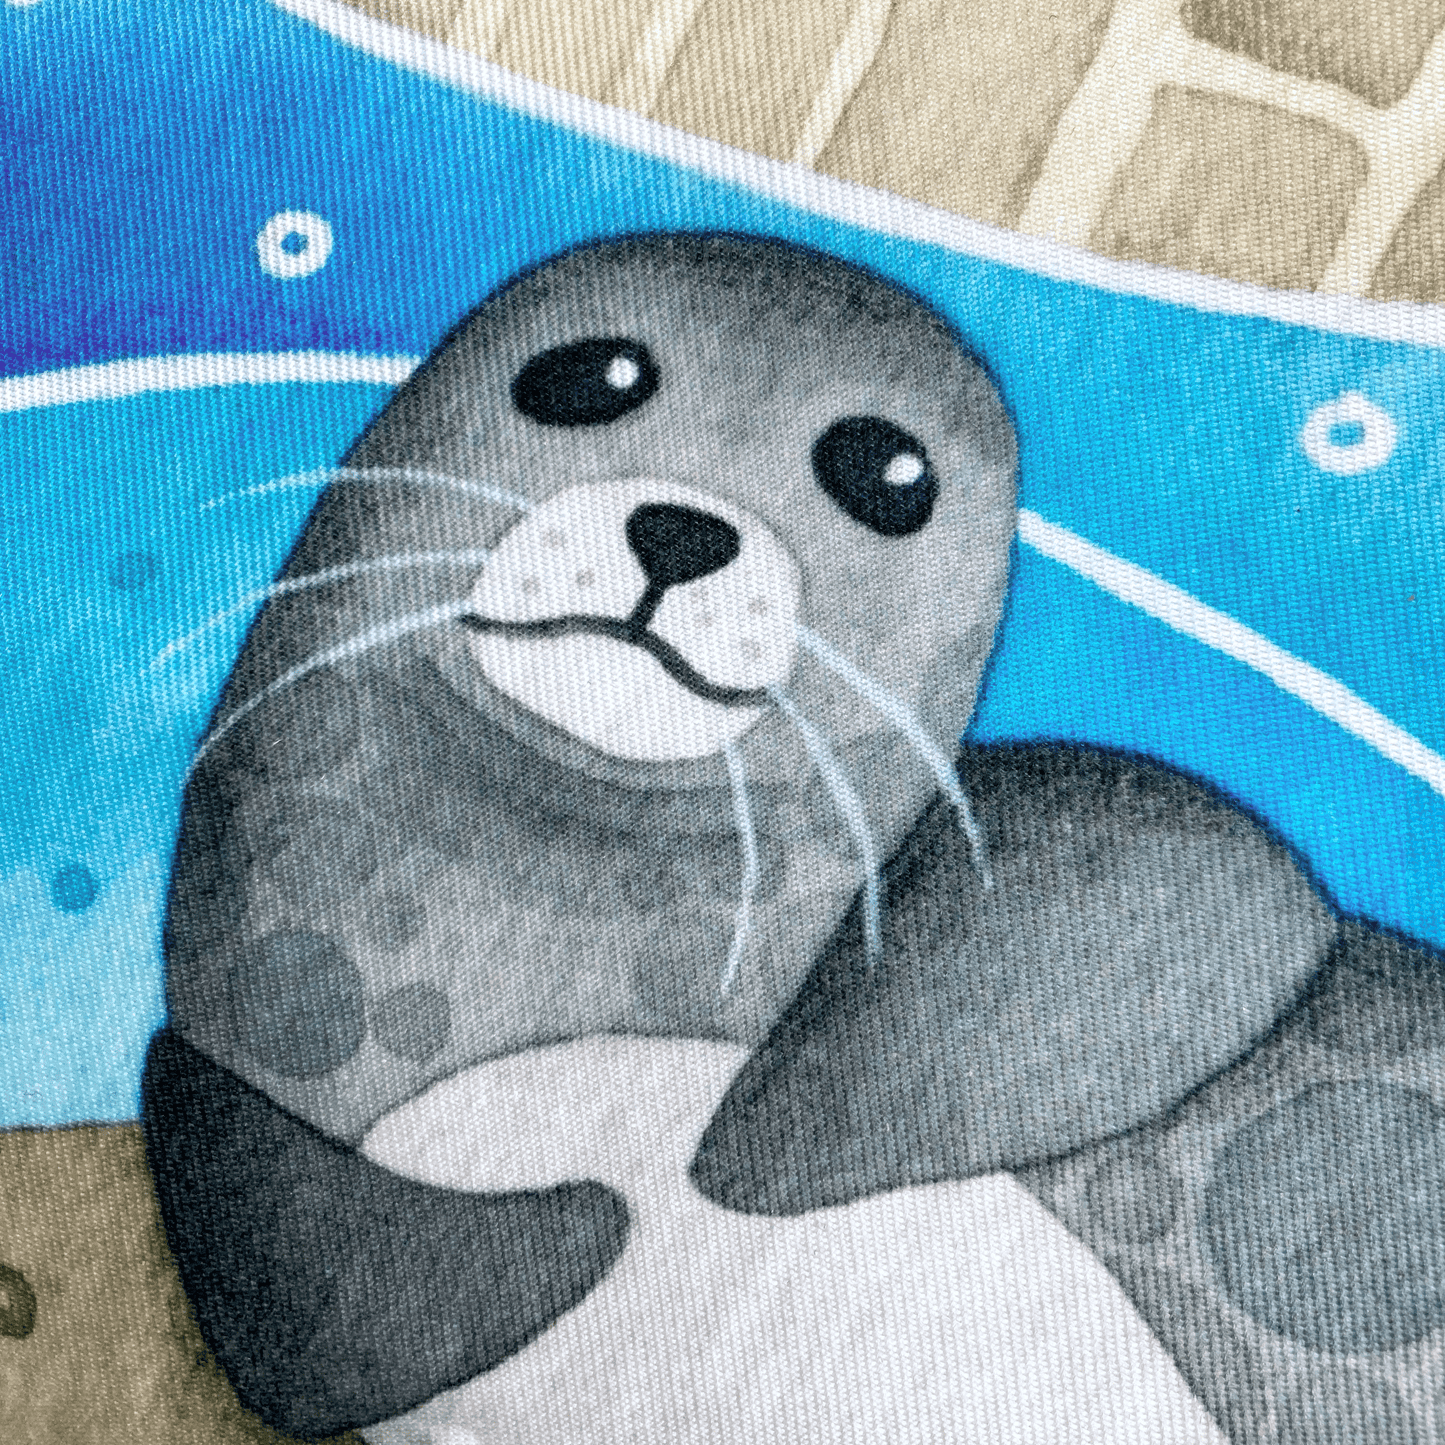 Cushion Cover - Sammy Seal at Pittenweem Harbour - Seaside Watercolours - East Neuk Beach Crafts